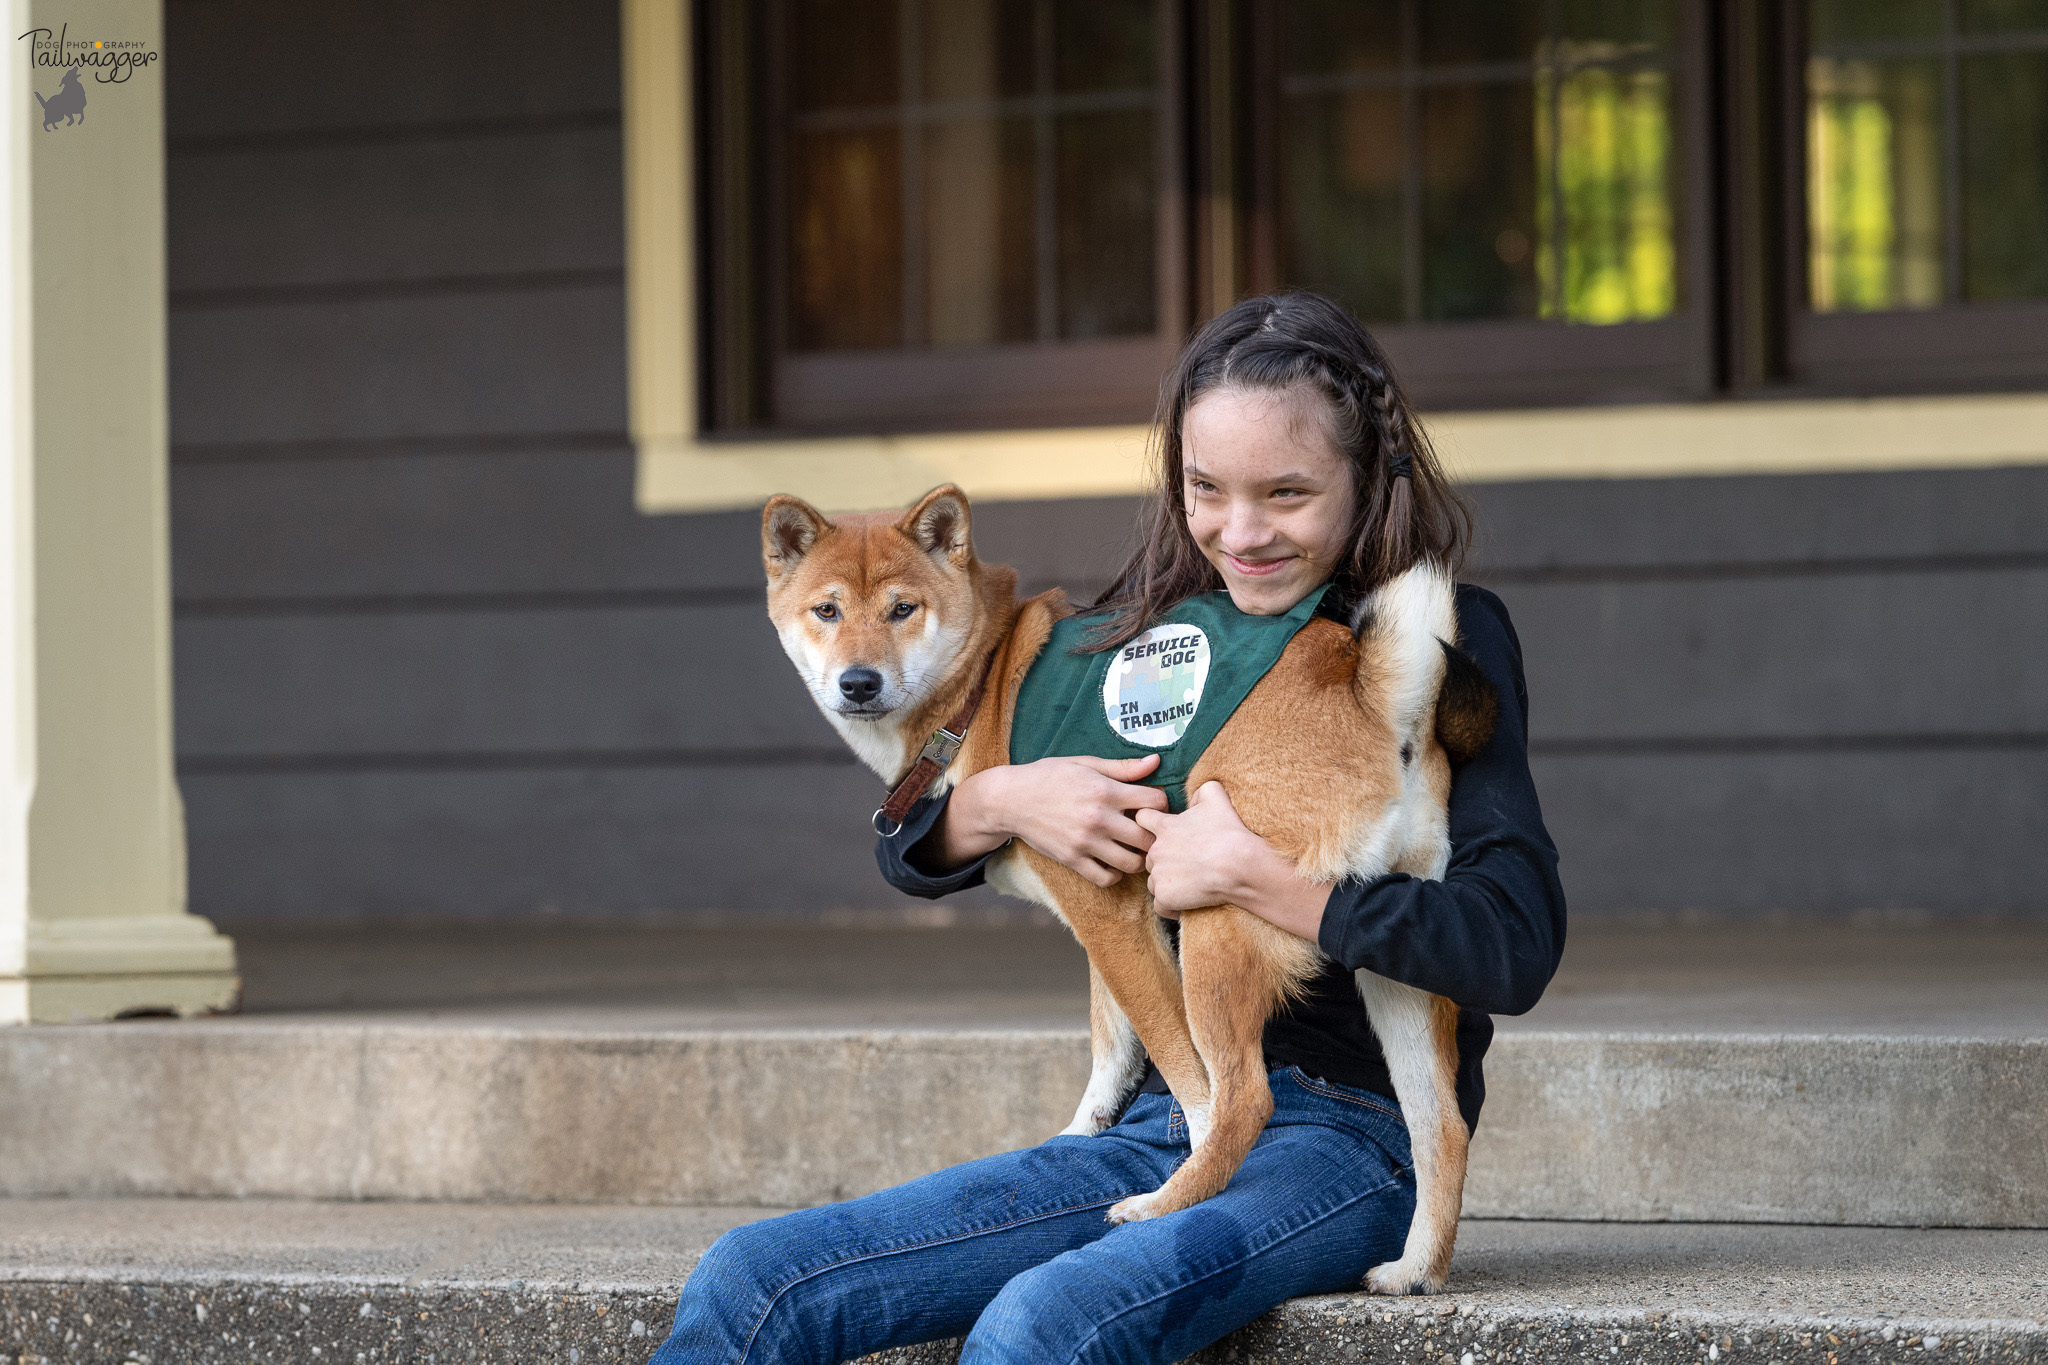 A Shiba Inu service dog in training sits on the lap of a young woman at Johnson Park in Grand Rapids, MI.